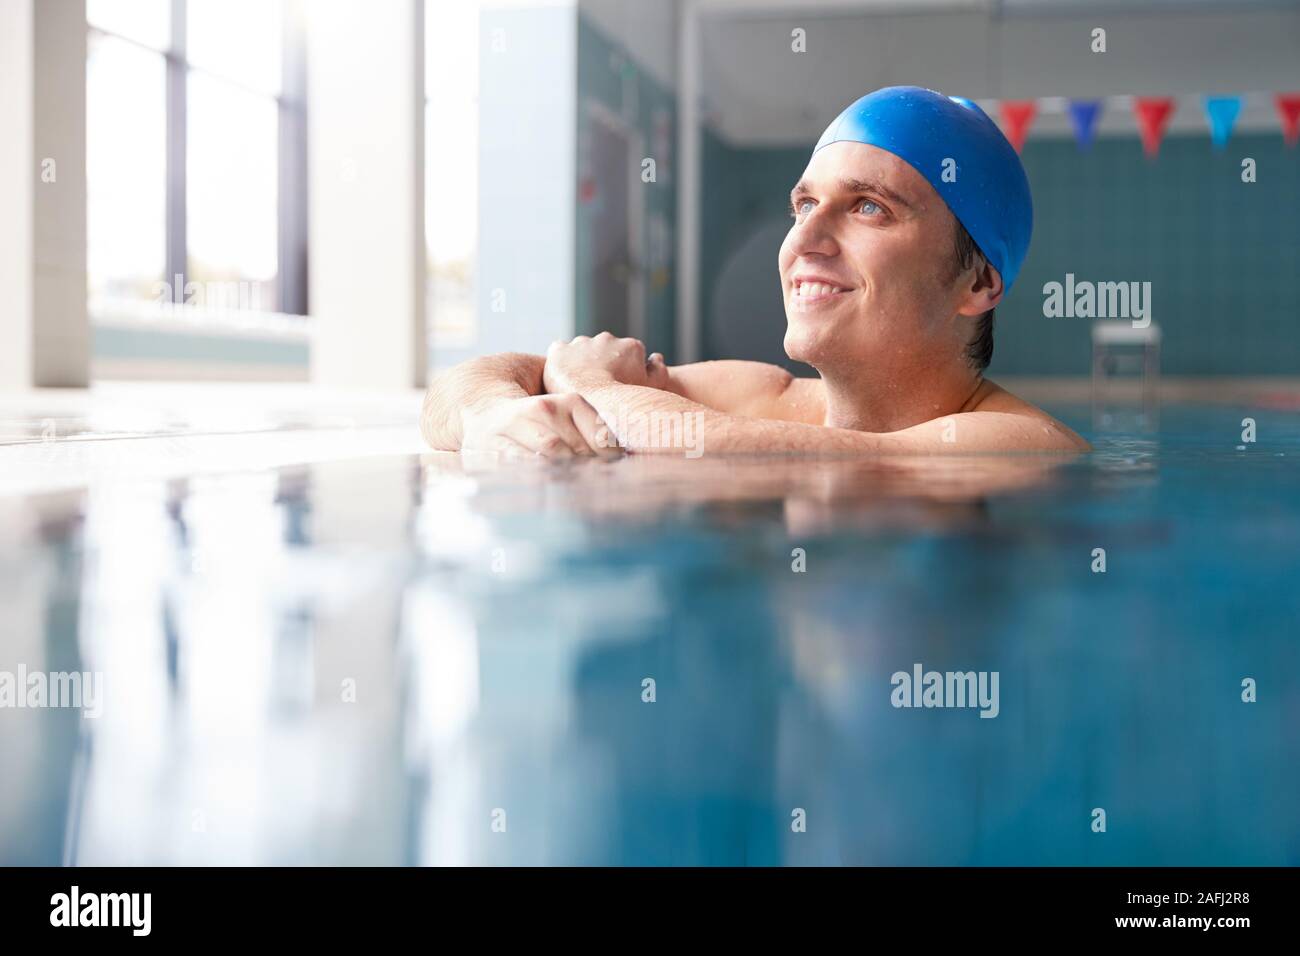 Male Swimmer Wearing Hat And Goggles Training In Swimming Pool Stock Photo